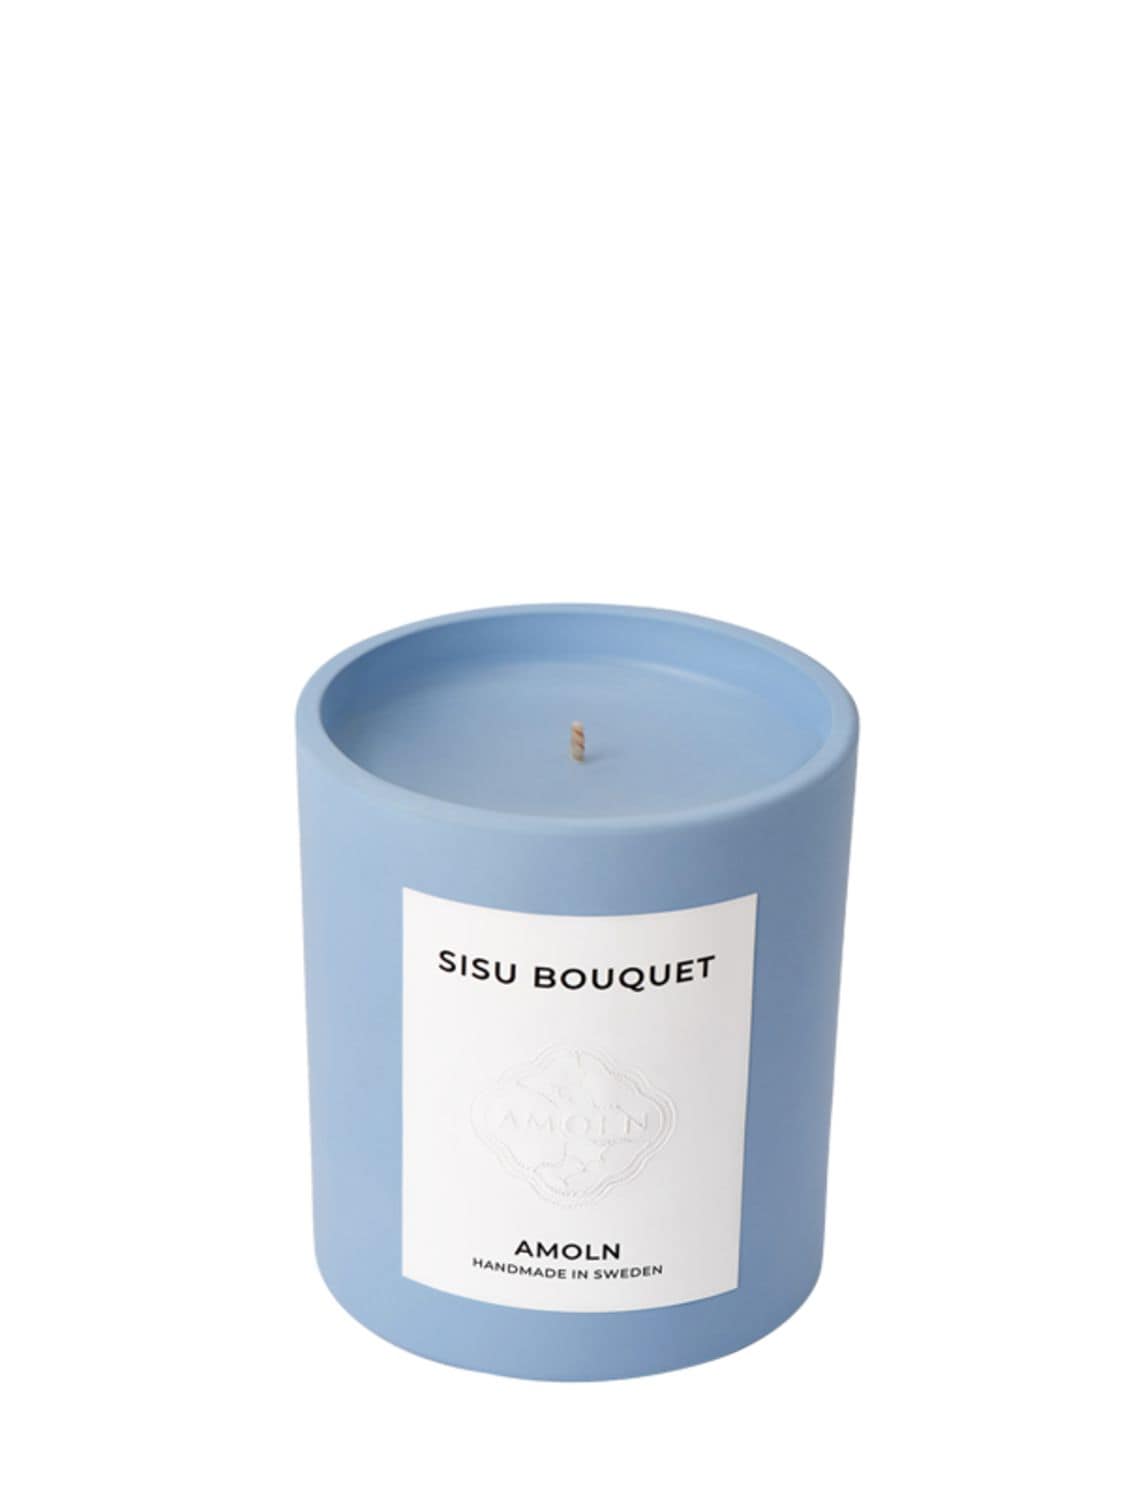 Amoln Sisu Bouquet Scented Candle In Blue